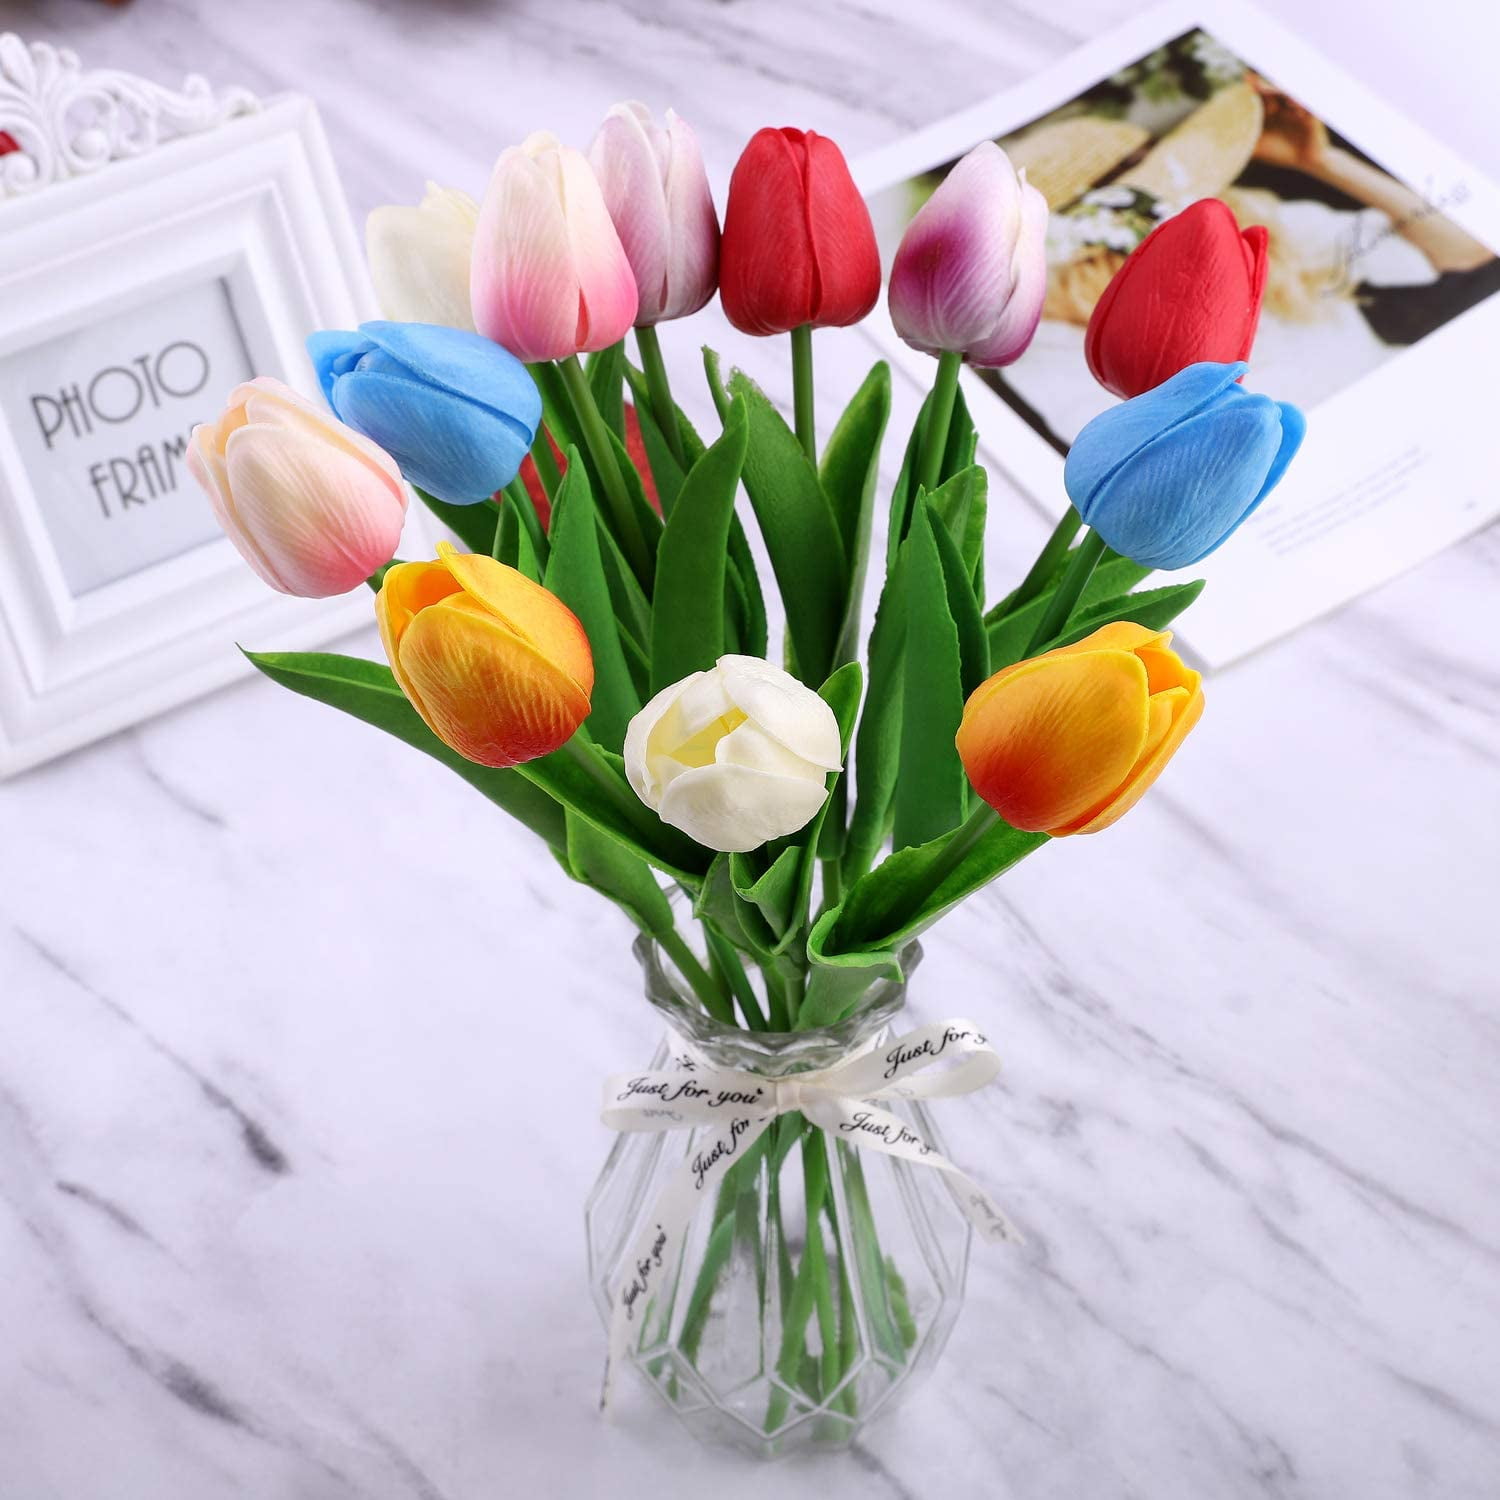 12 Pack Artificial Tulips Flowers Fake Tulips Bouquet Real Touch PU Tulips  Arrangement Home Wedding Floral Decor - Walmart.com